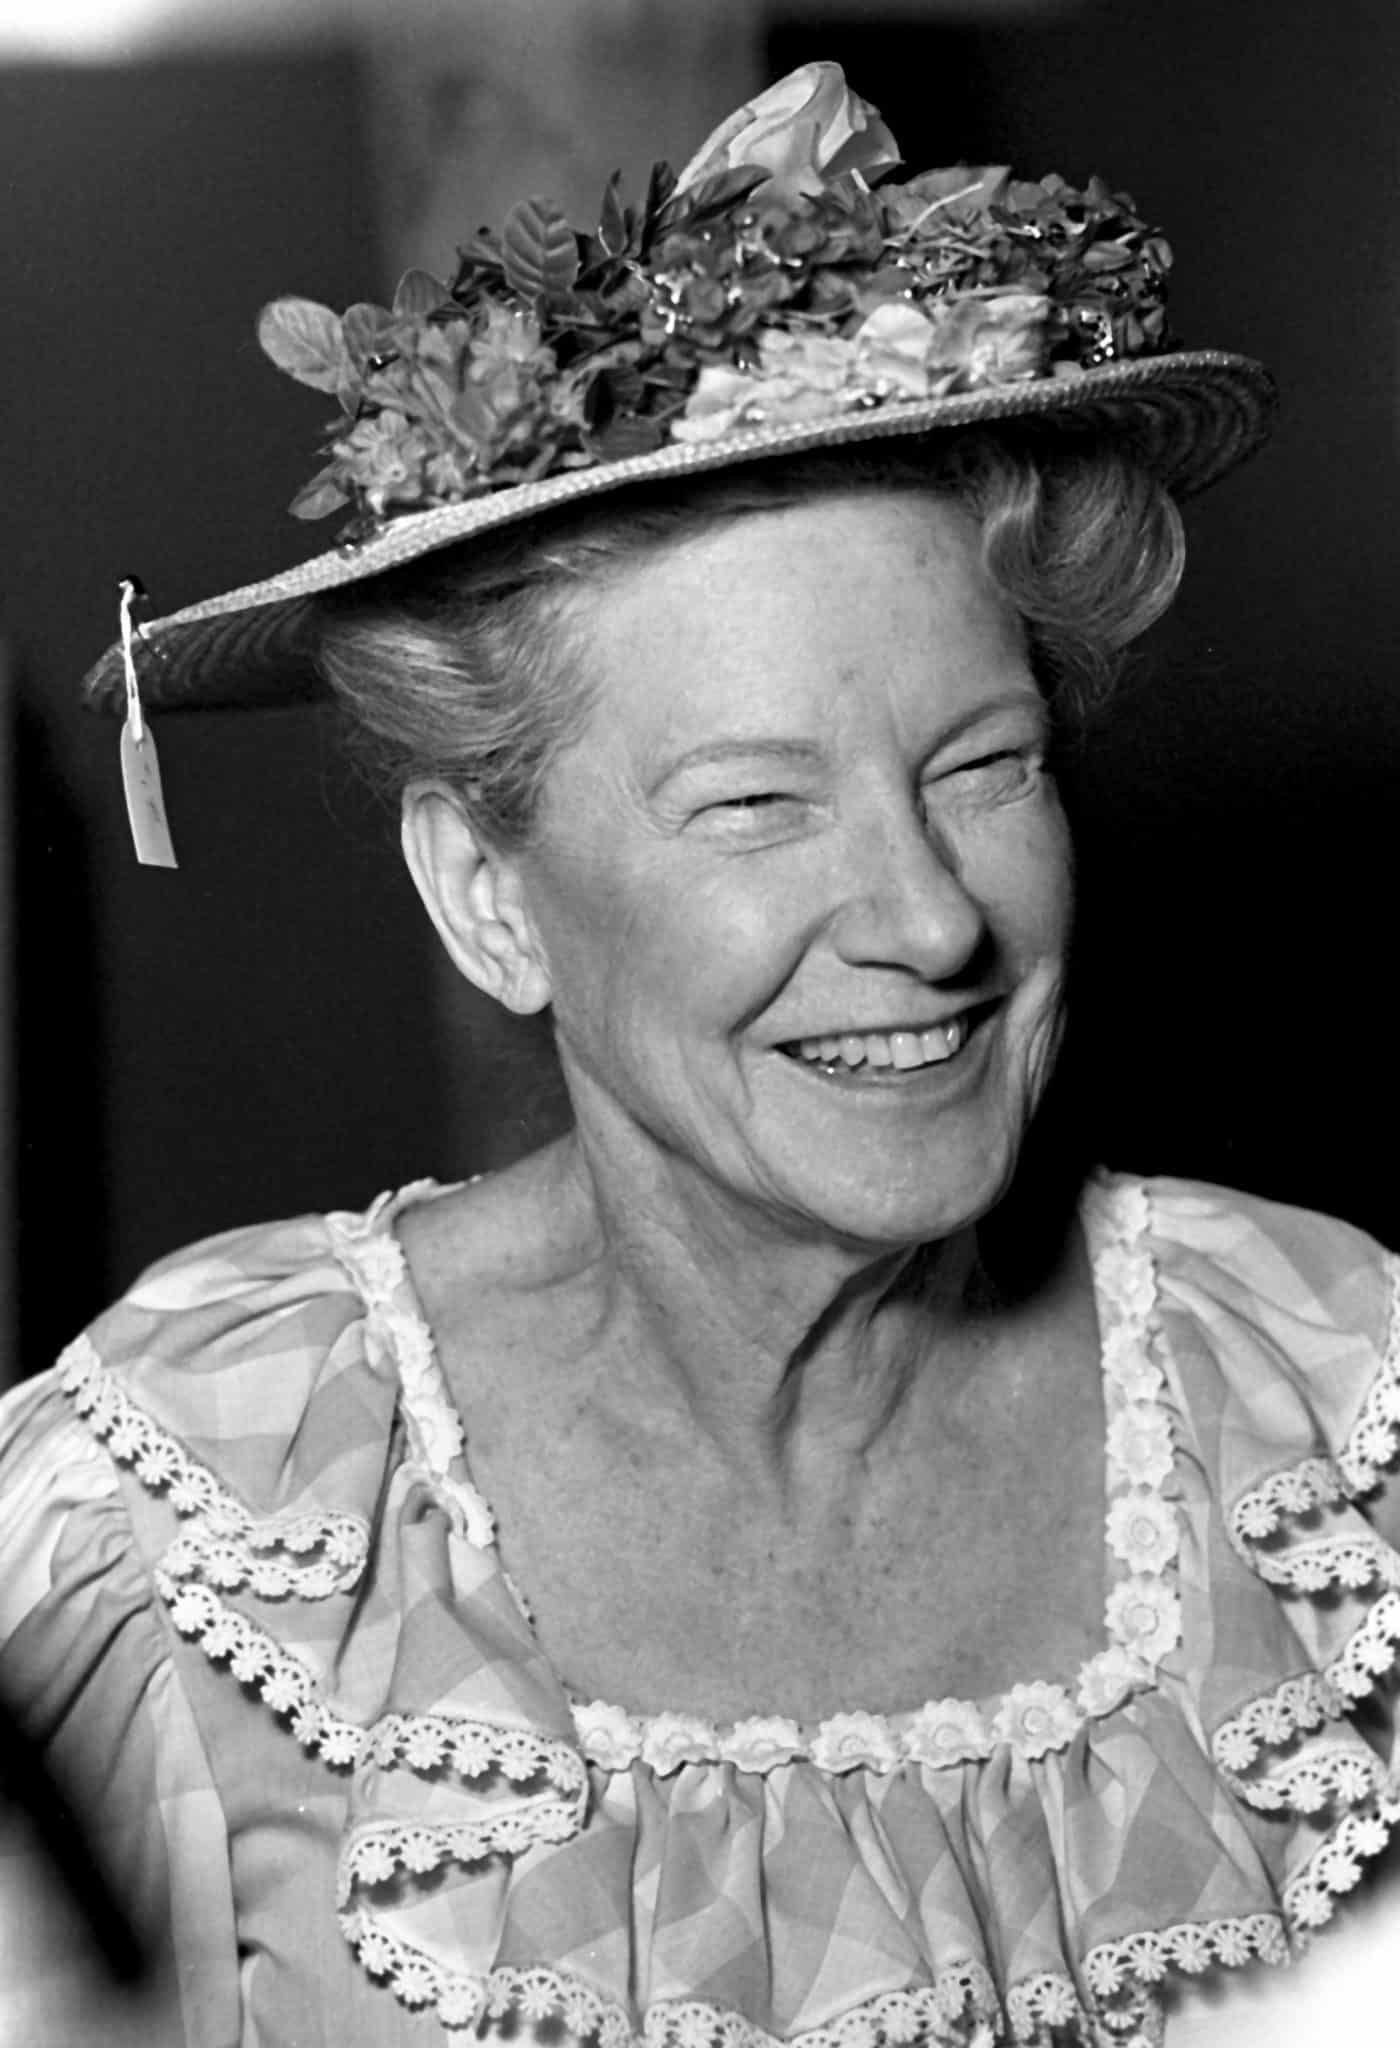 "Hee Haw" star Minnie Pearl, pictured here, told Hank Jr. a funny story about his dad Hank Williams